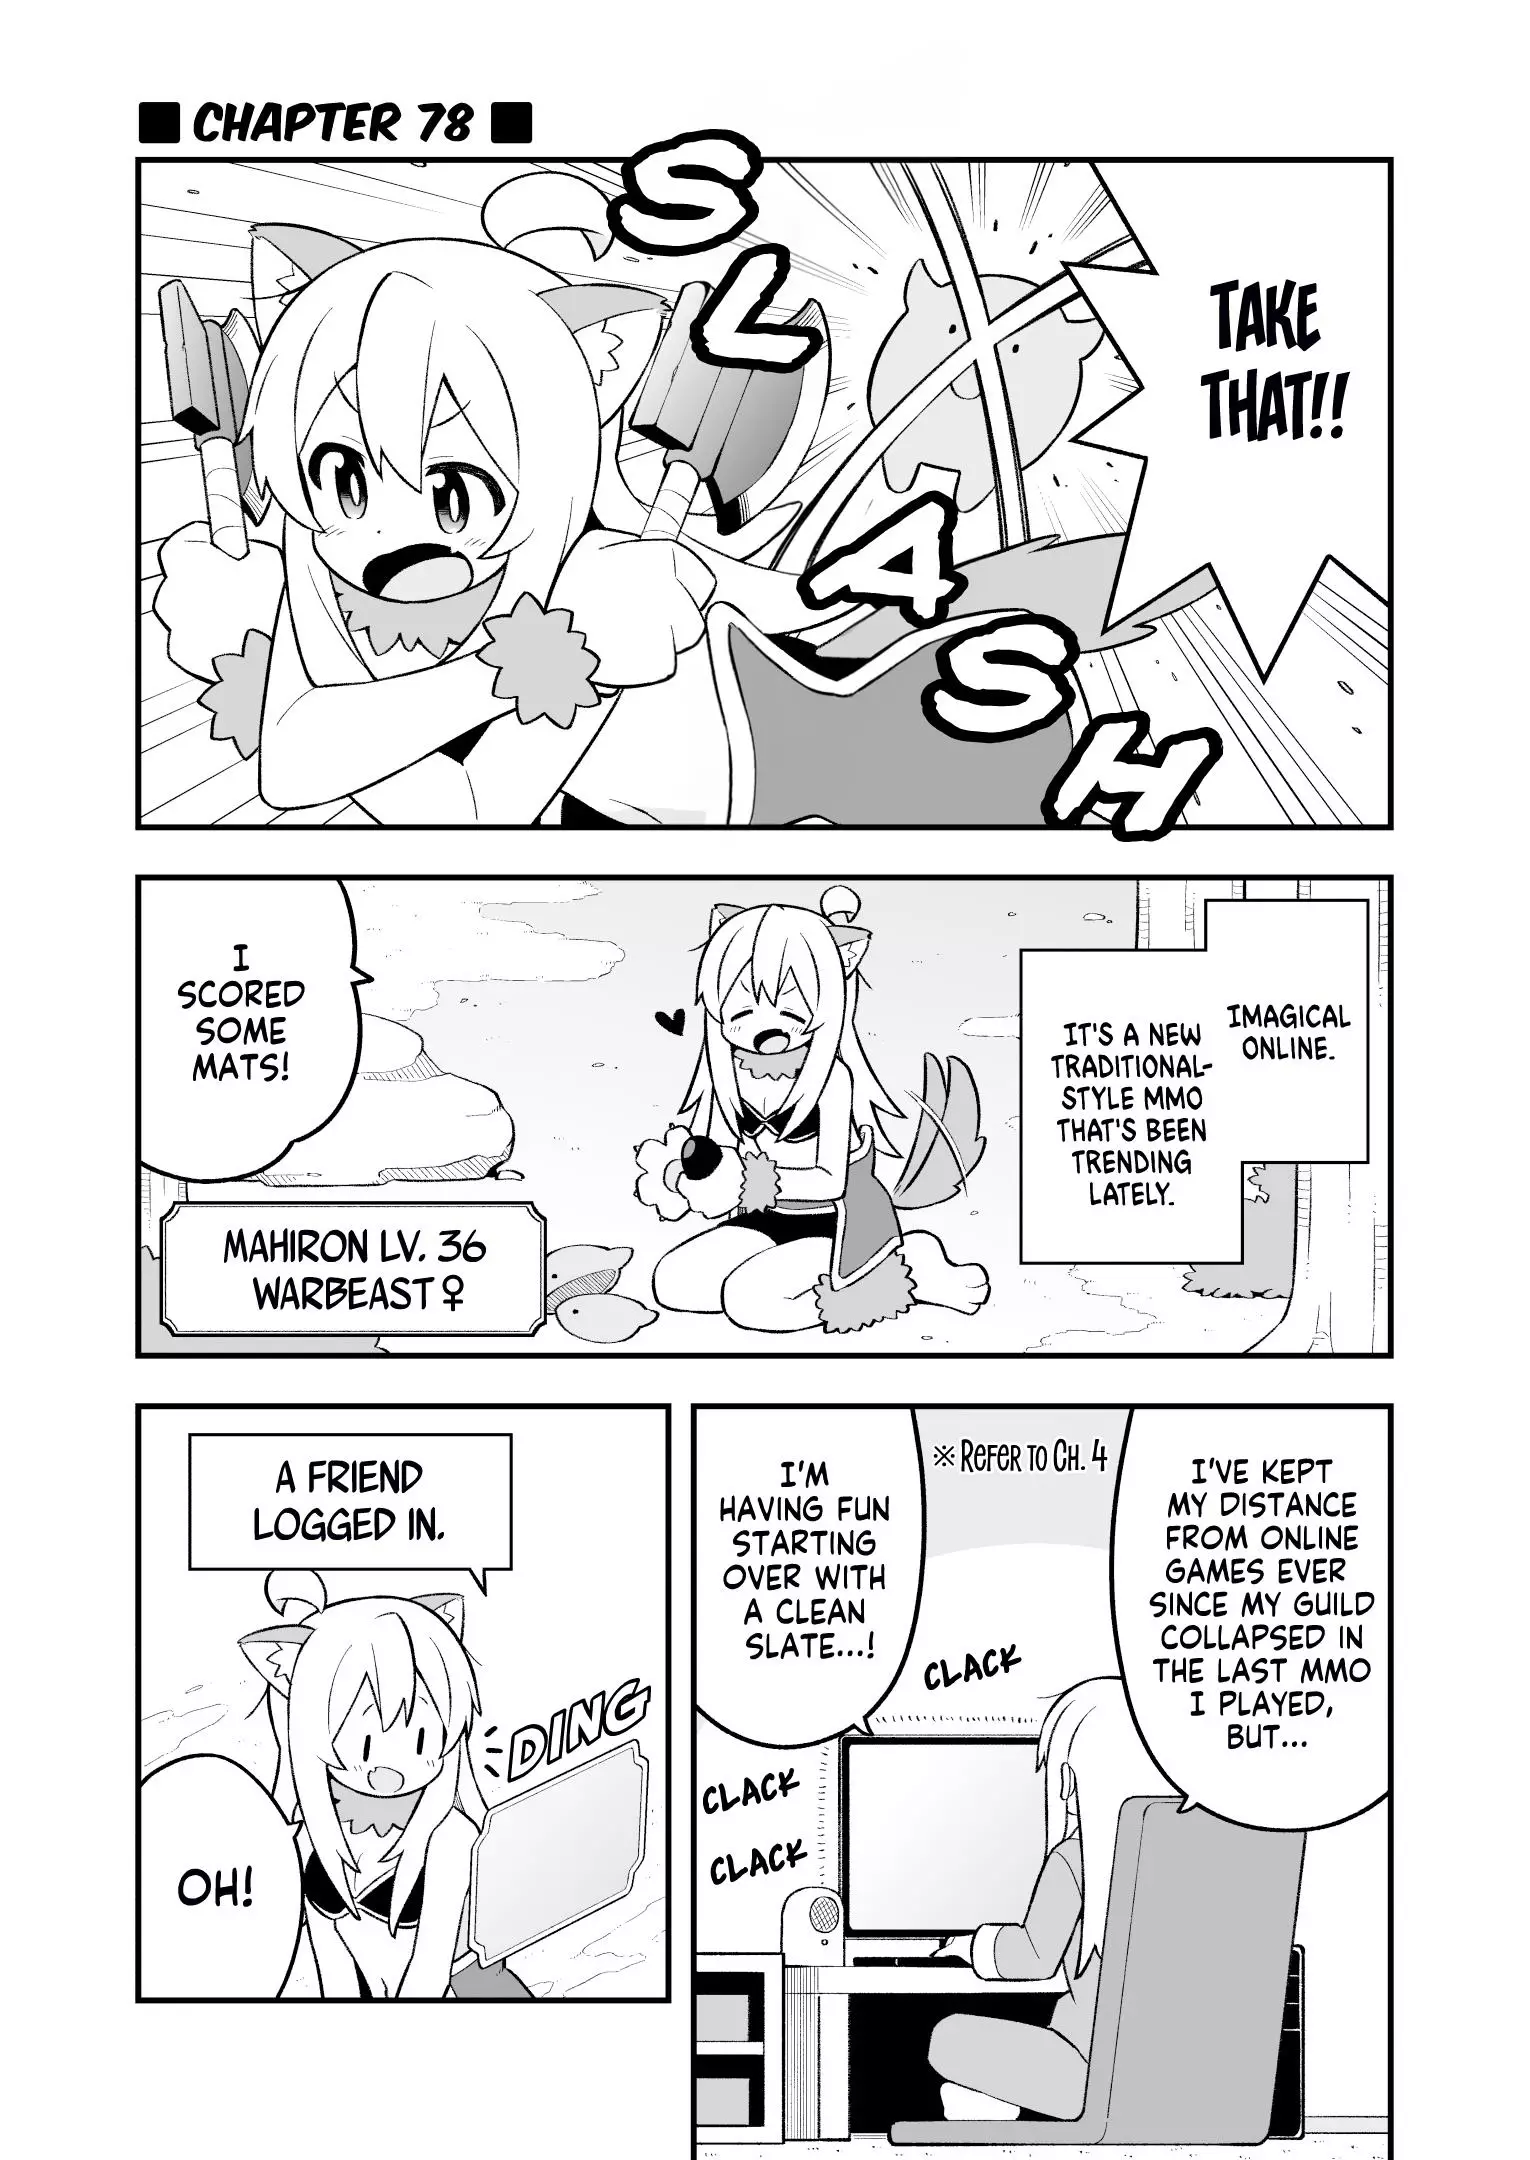 Onii-Chan Is Done For - 78 page 1-879bccb7